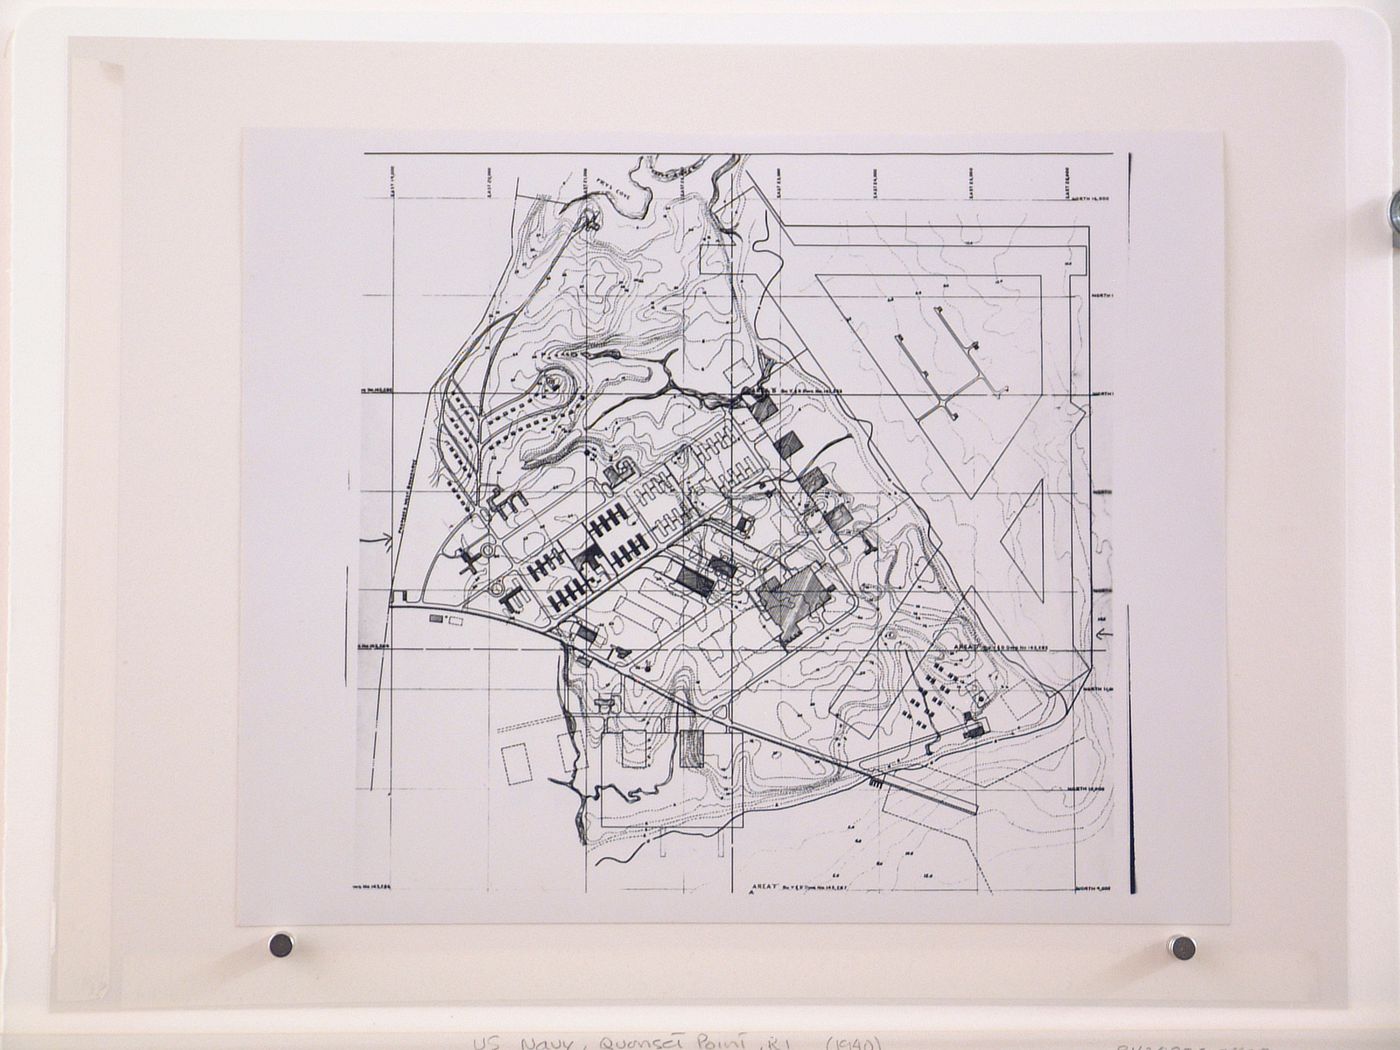 Photograph of a topographic map showing arrangements for buildings, United States Naval Air Base, Quonset Point, Rhode Island